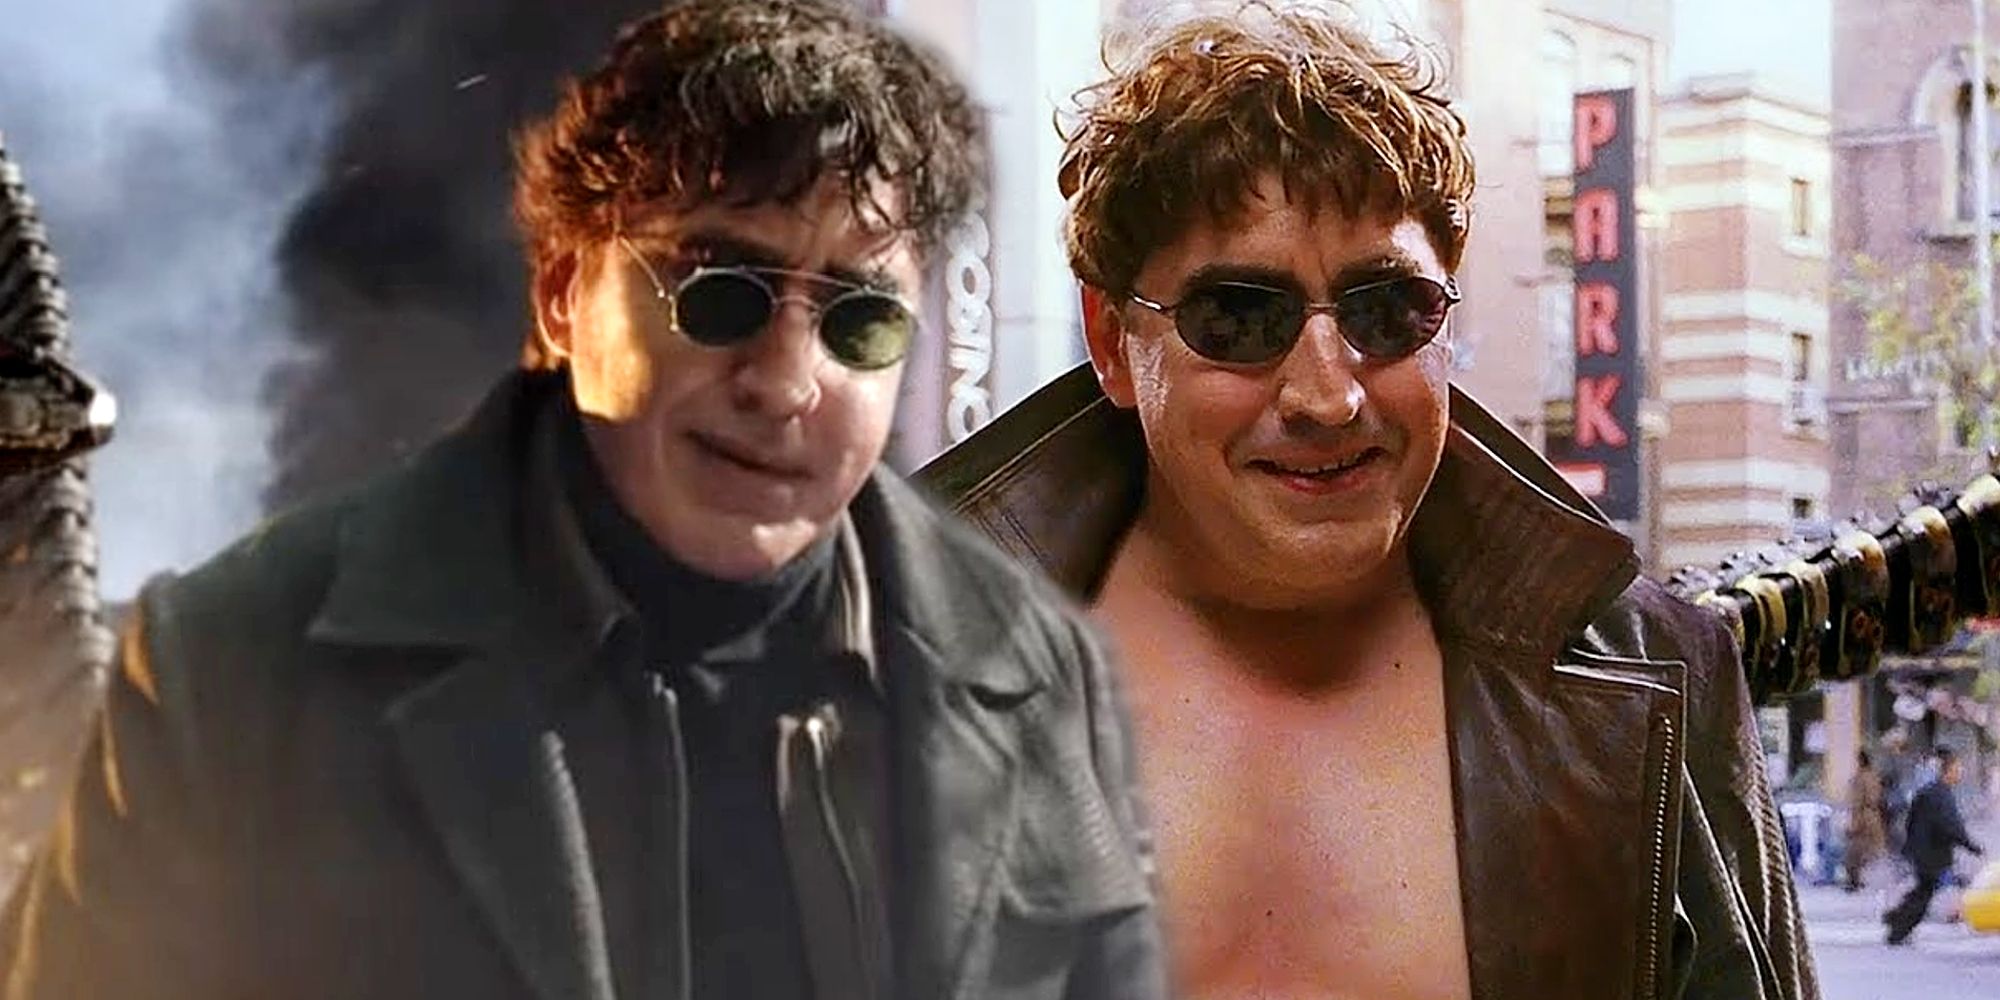 Alfred Molina as Doctor Octopus in Sam Raimi's Spider-Man 2 and No Way Home